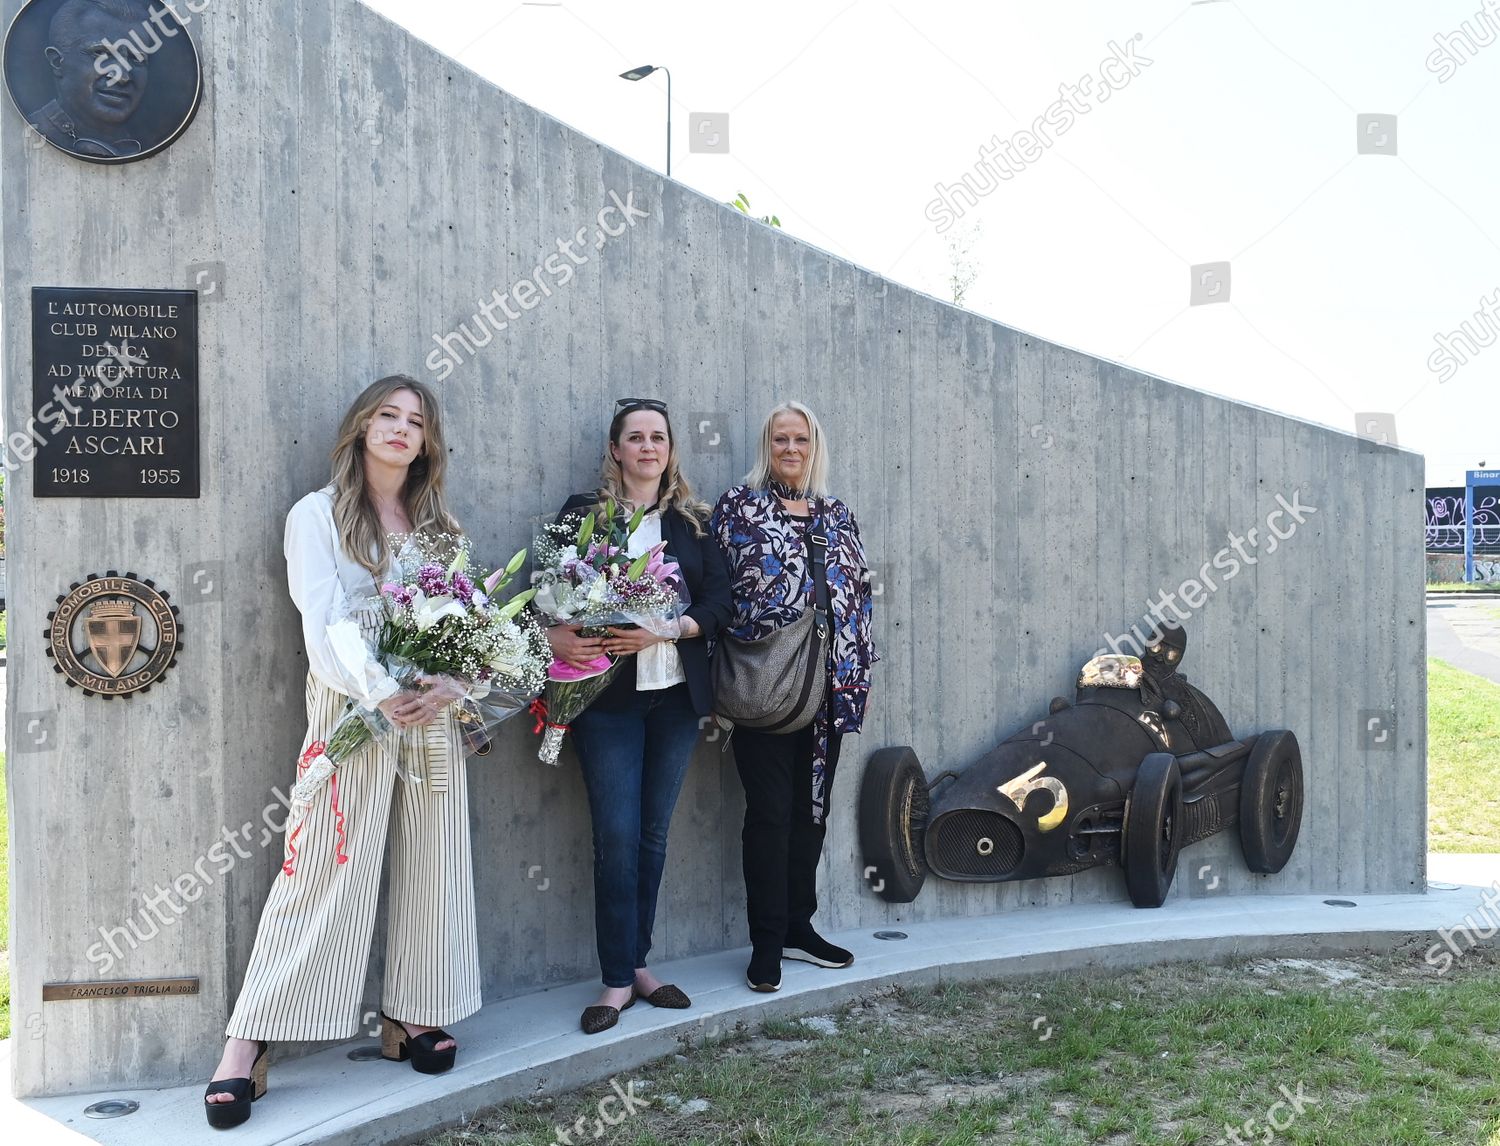 Inauguration of the monument dedicated to Alberto Ascari at the presence of Veronica and Selvaggia Ascari, respectively nephew and great-granddaughter of the champion.